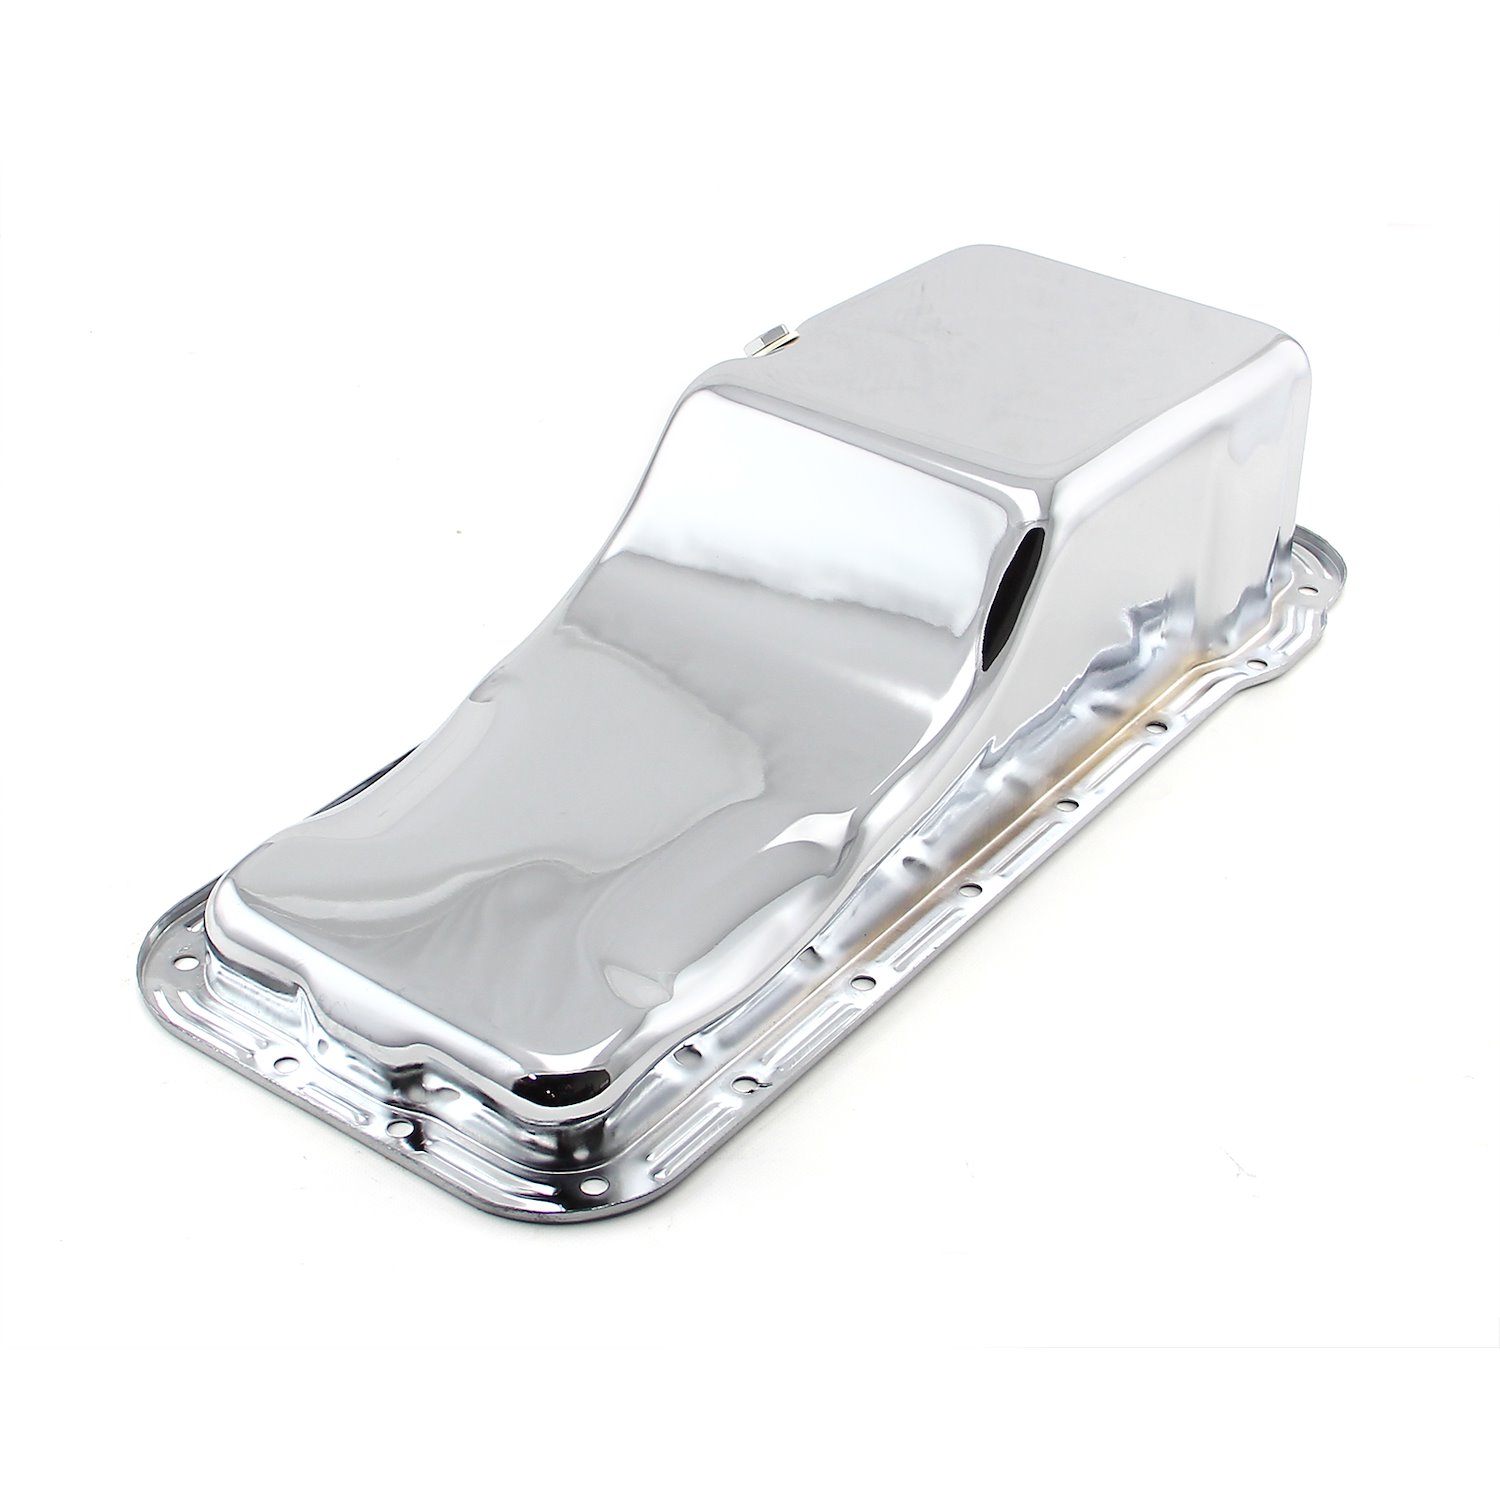 PCE300.1045 Steel Oil Pan, Ford FE 390/427/428, Front Wet Sump [Chrome]